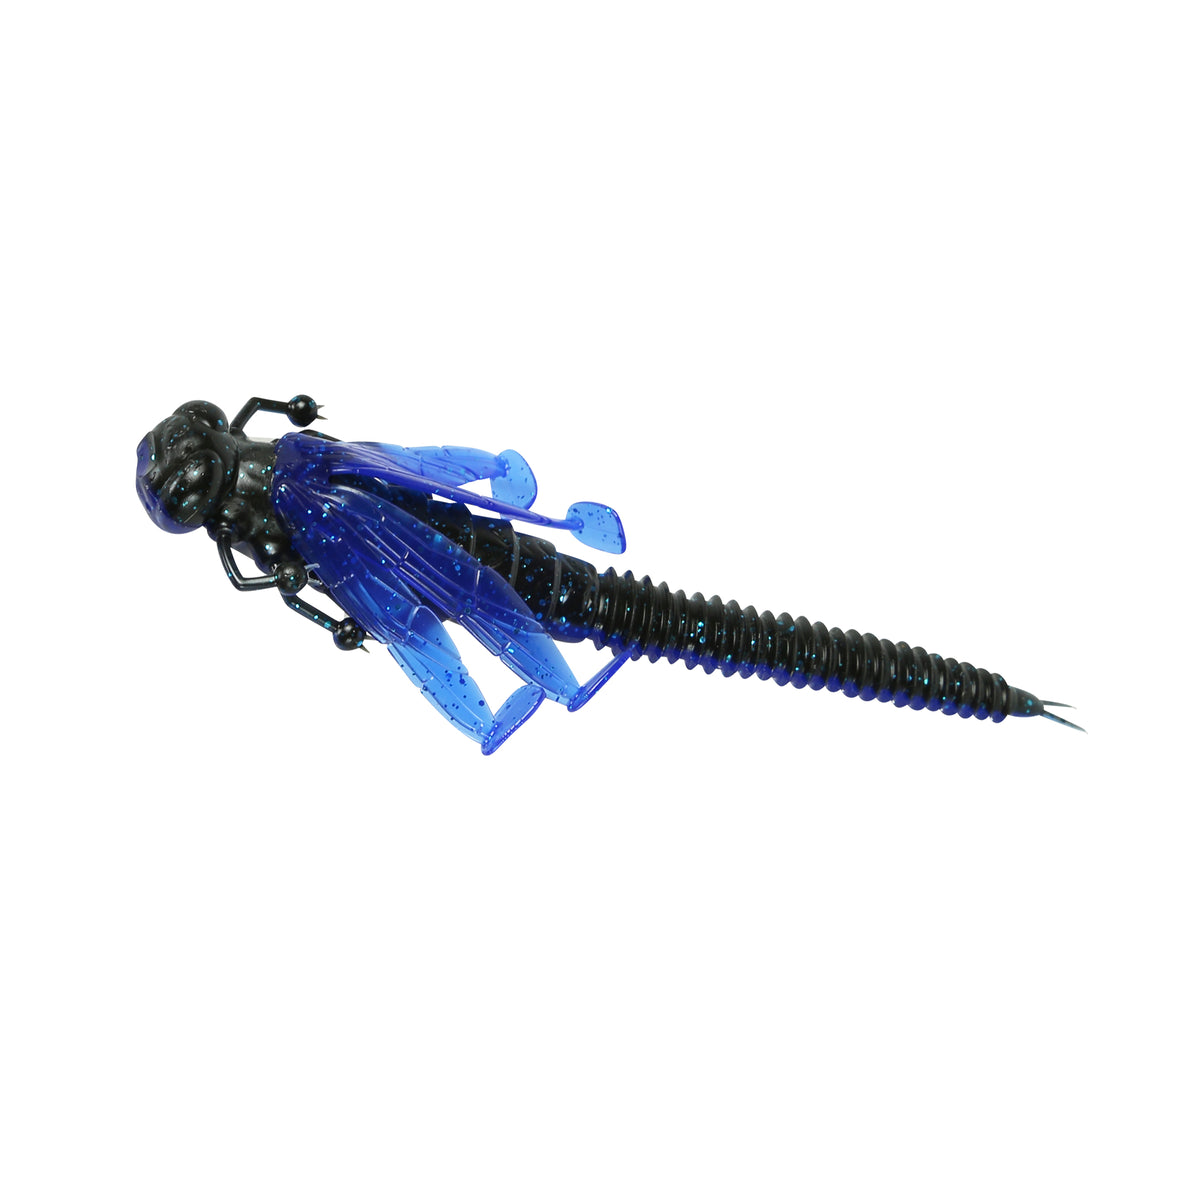 Dick's Sporting Goods Fish Lab Nature series Nymph Creature Baits